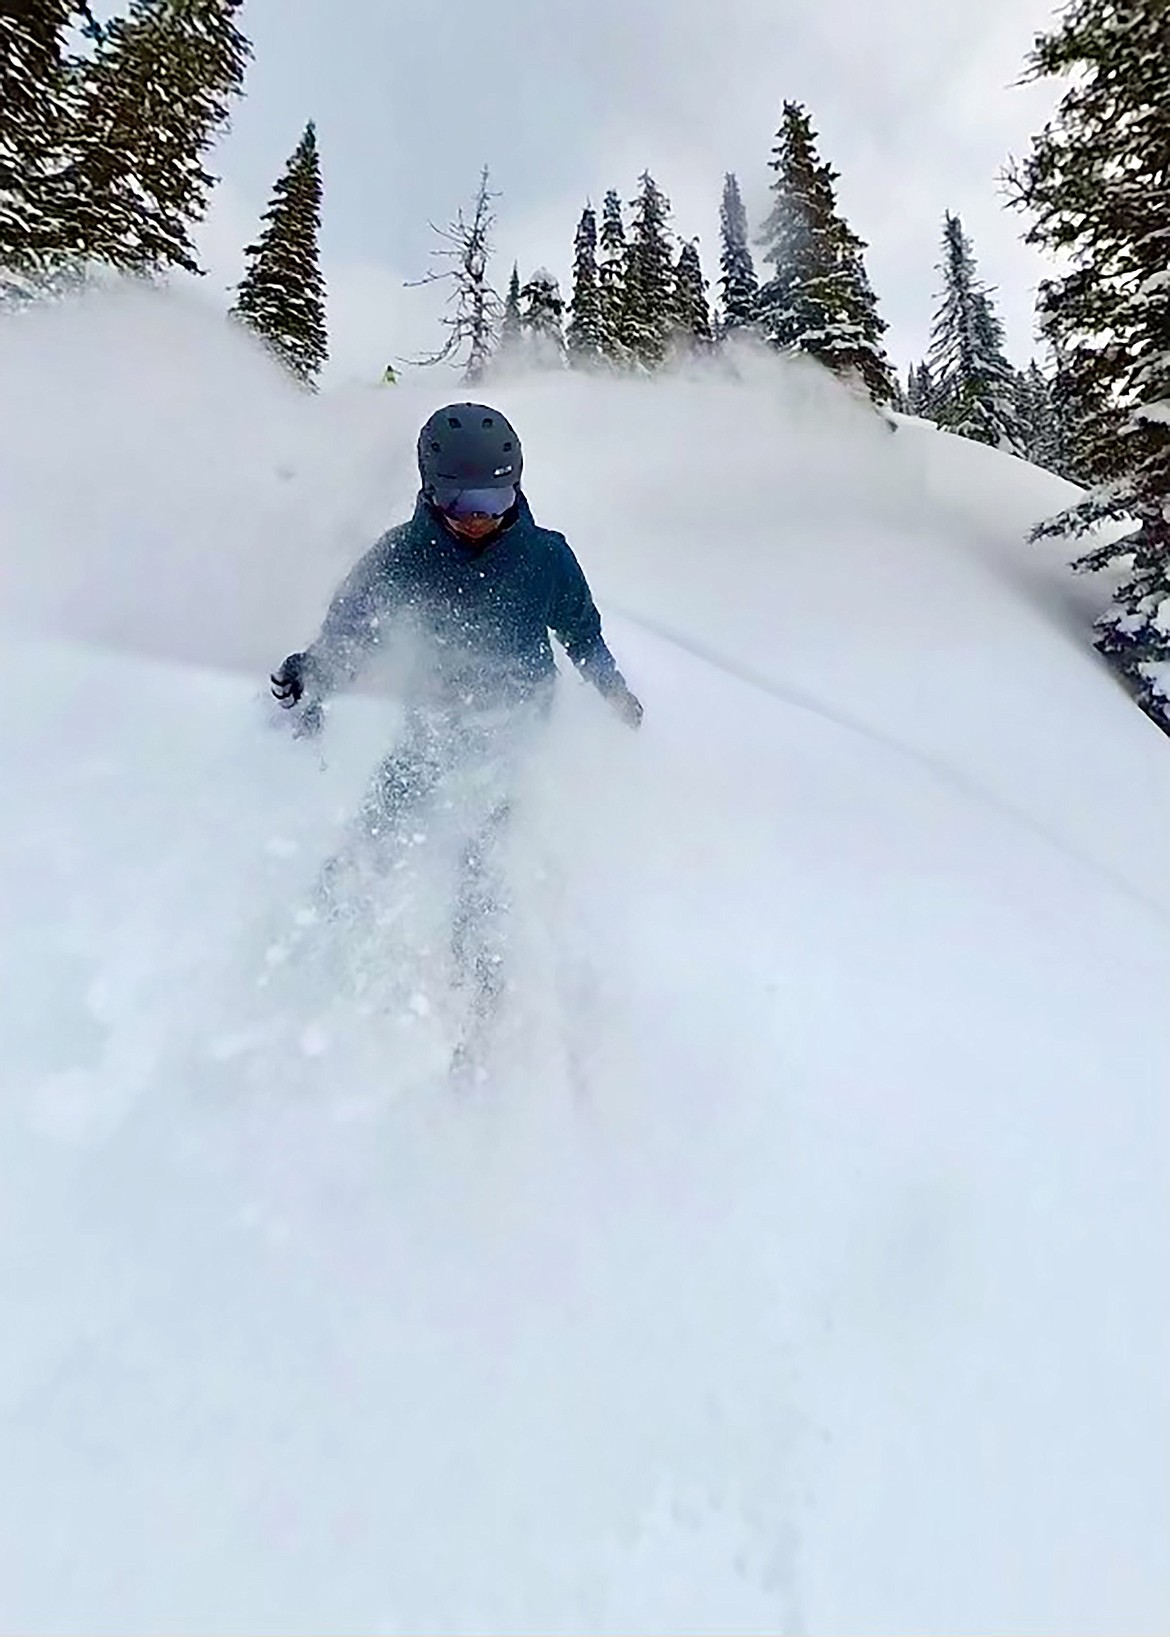 A skier dances in the powder during a Selkirk Powder backcountry trip.